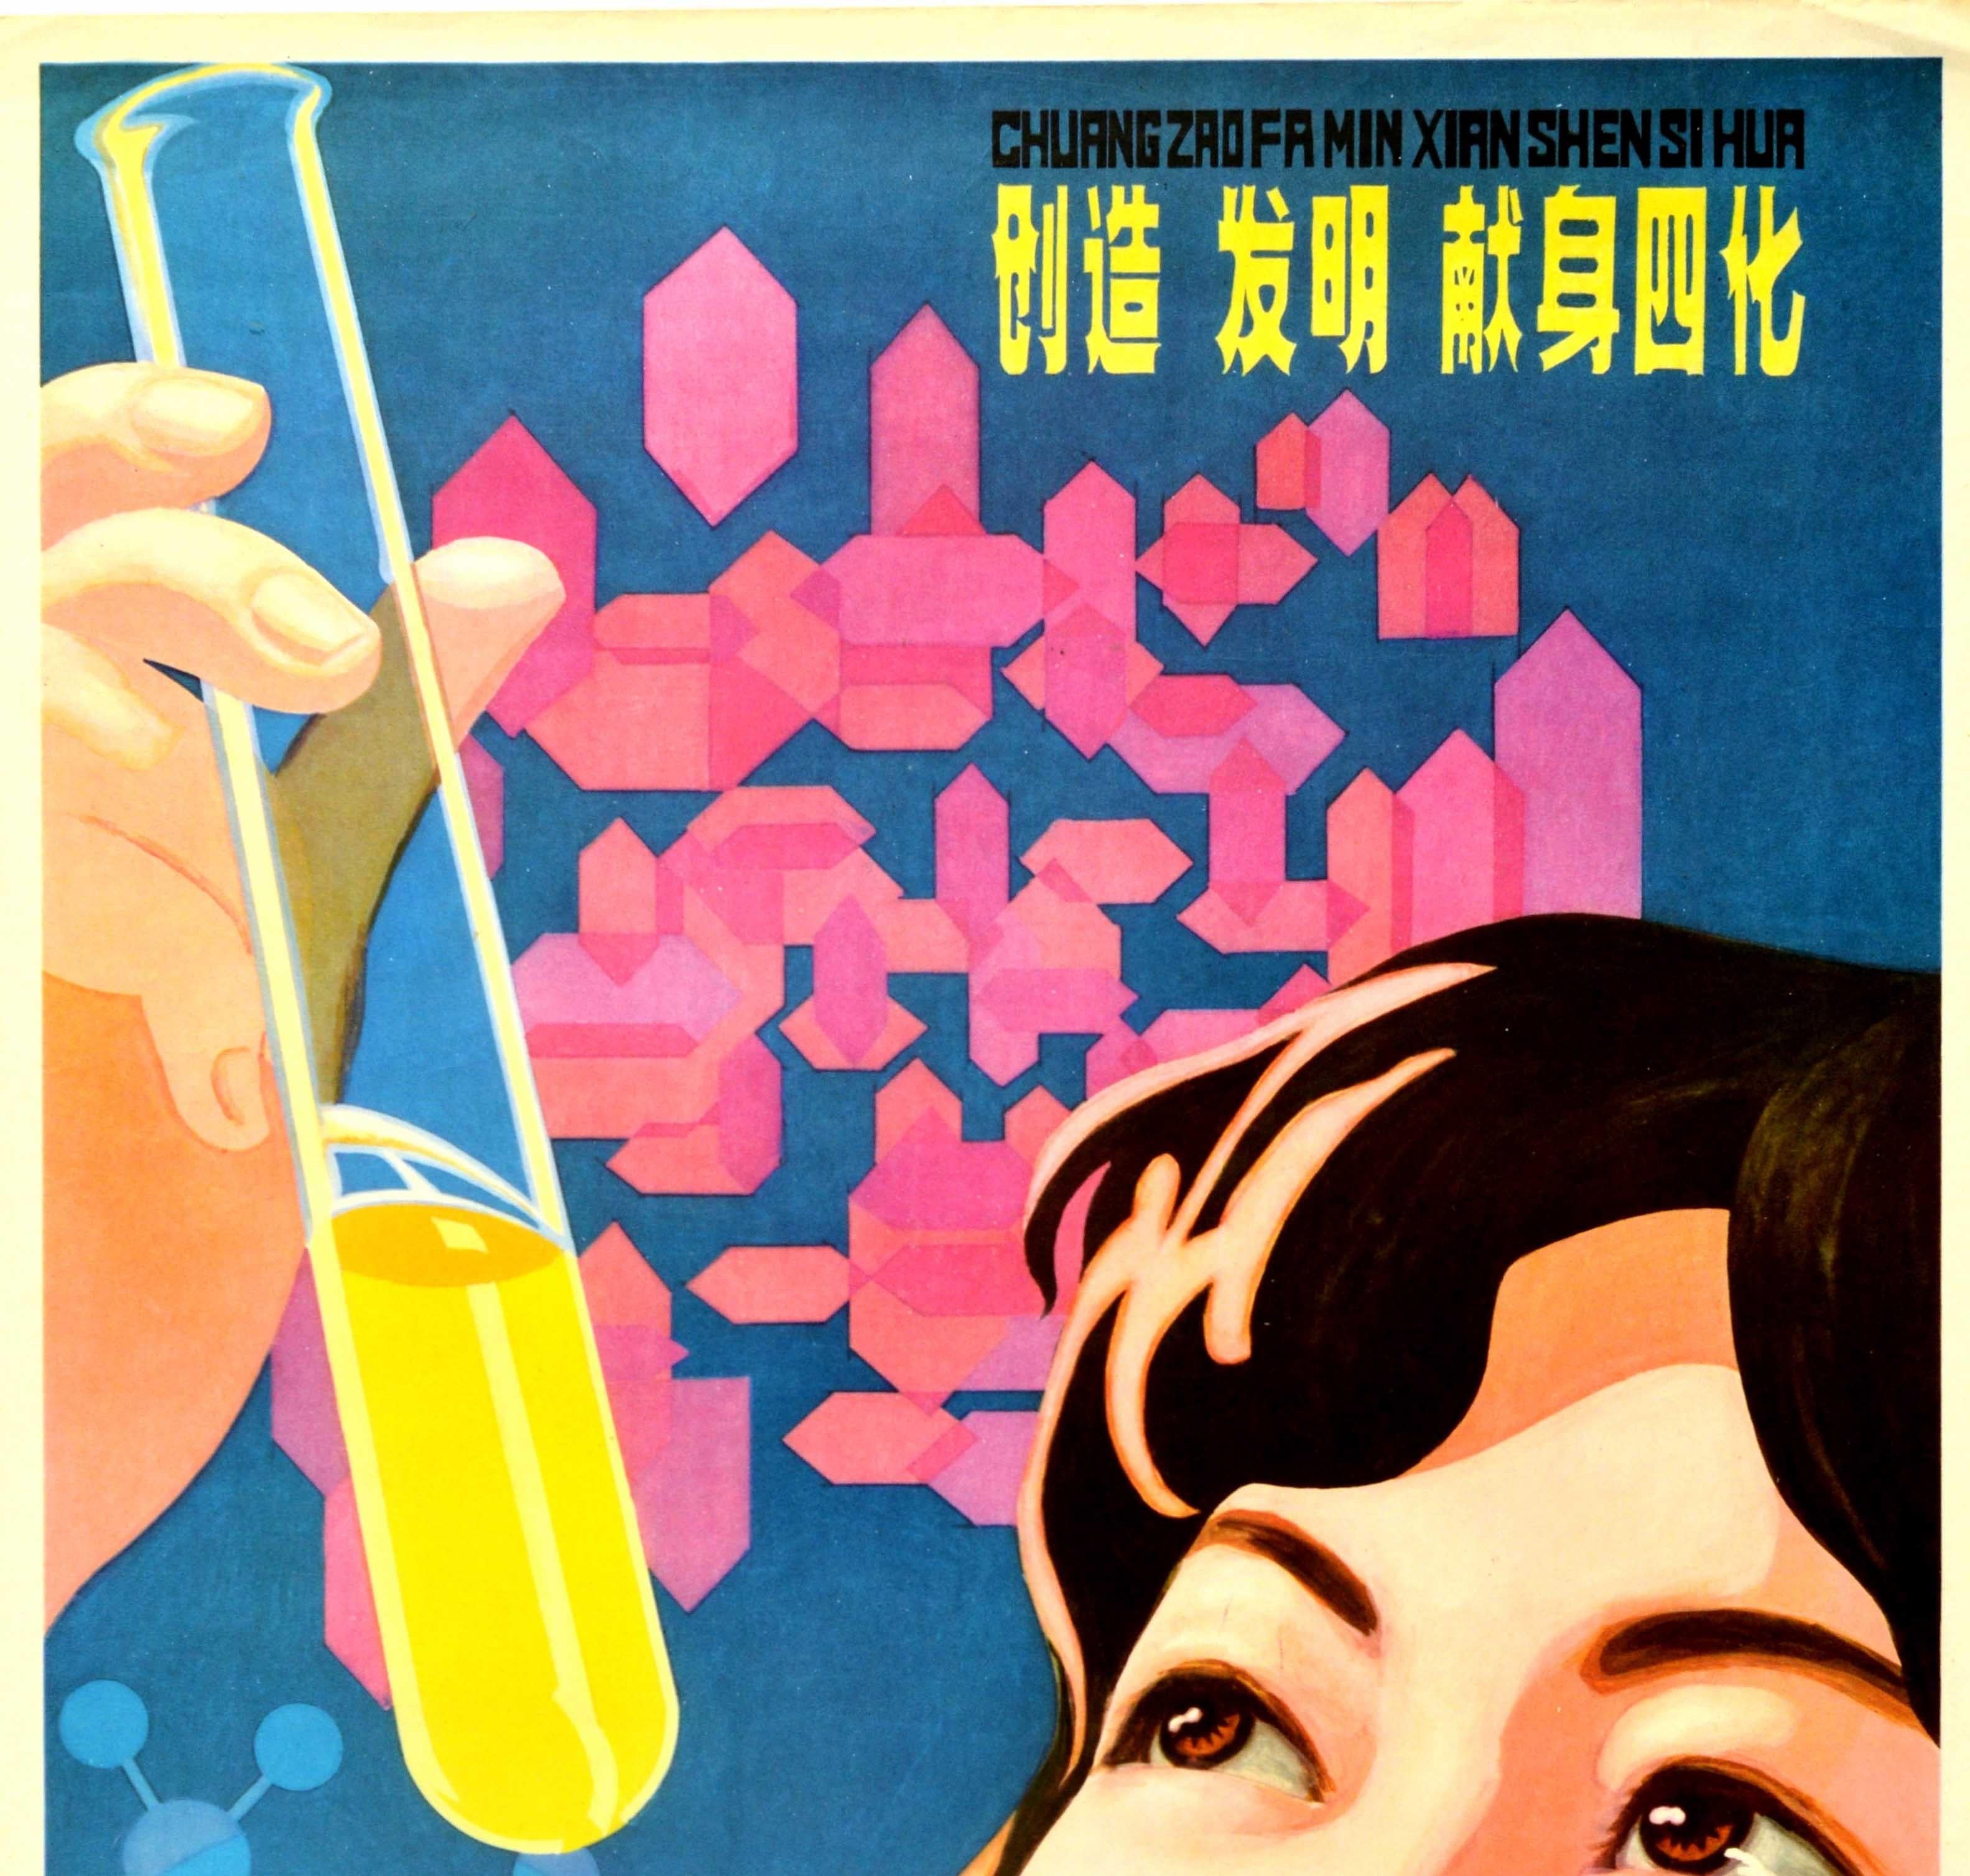 Original vintage Chinese propaganda poster, Love Science, featuring a great design of a scientist holding up a test tube in front of scientific atom symbols on the blue background, the bold lettering in yellow and black above and below. Excellent